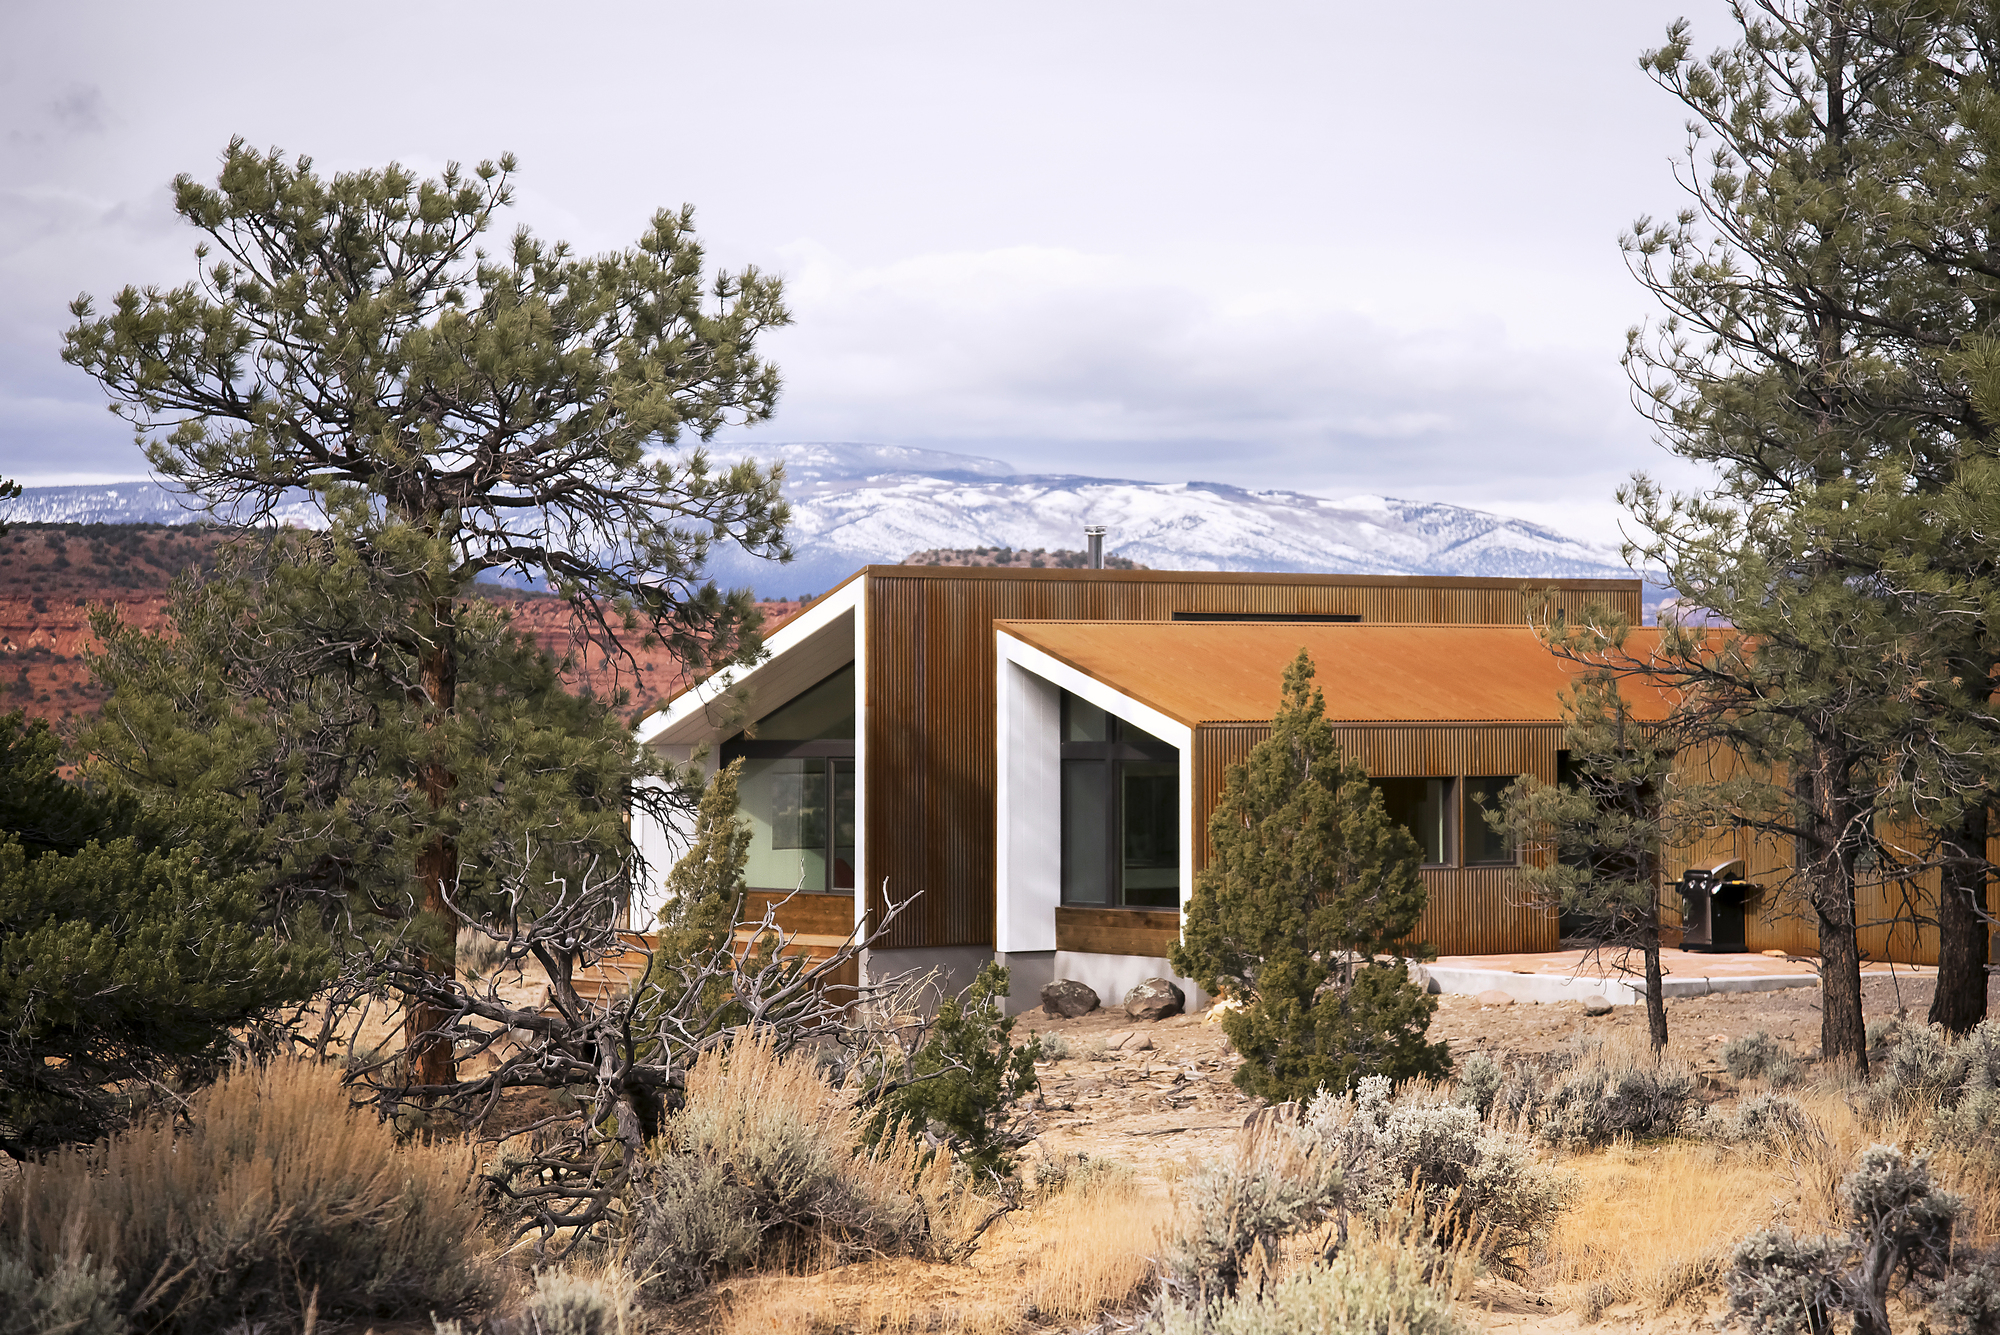 Corrugated Corten steel panels makeup the roof of this home in a remote desert location. 